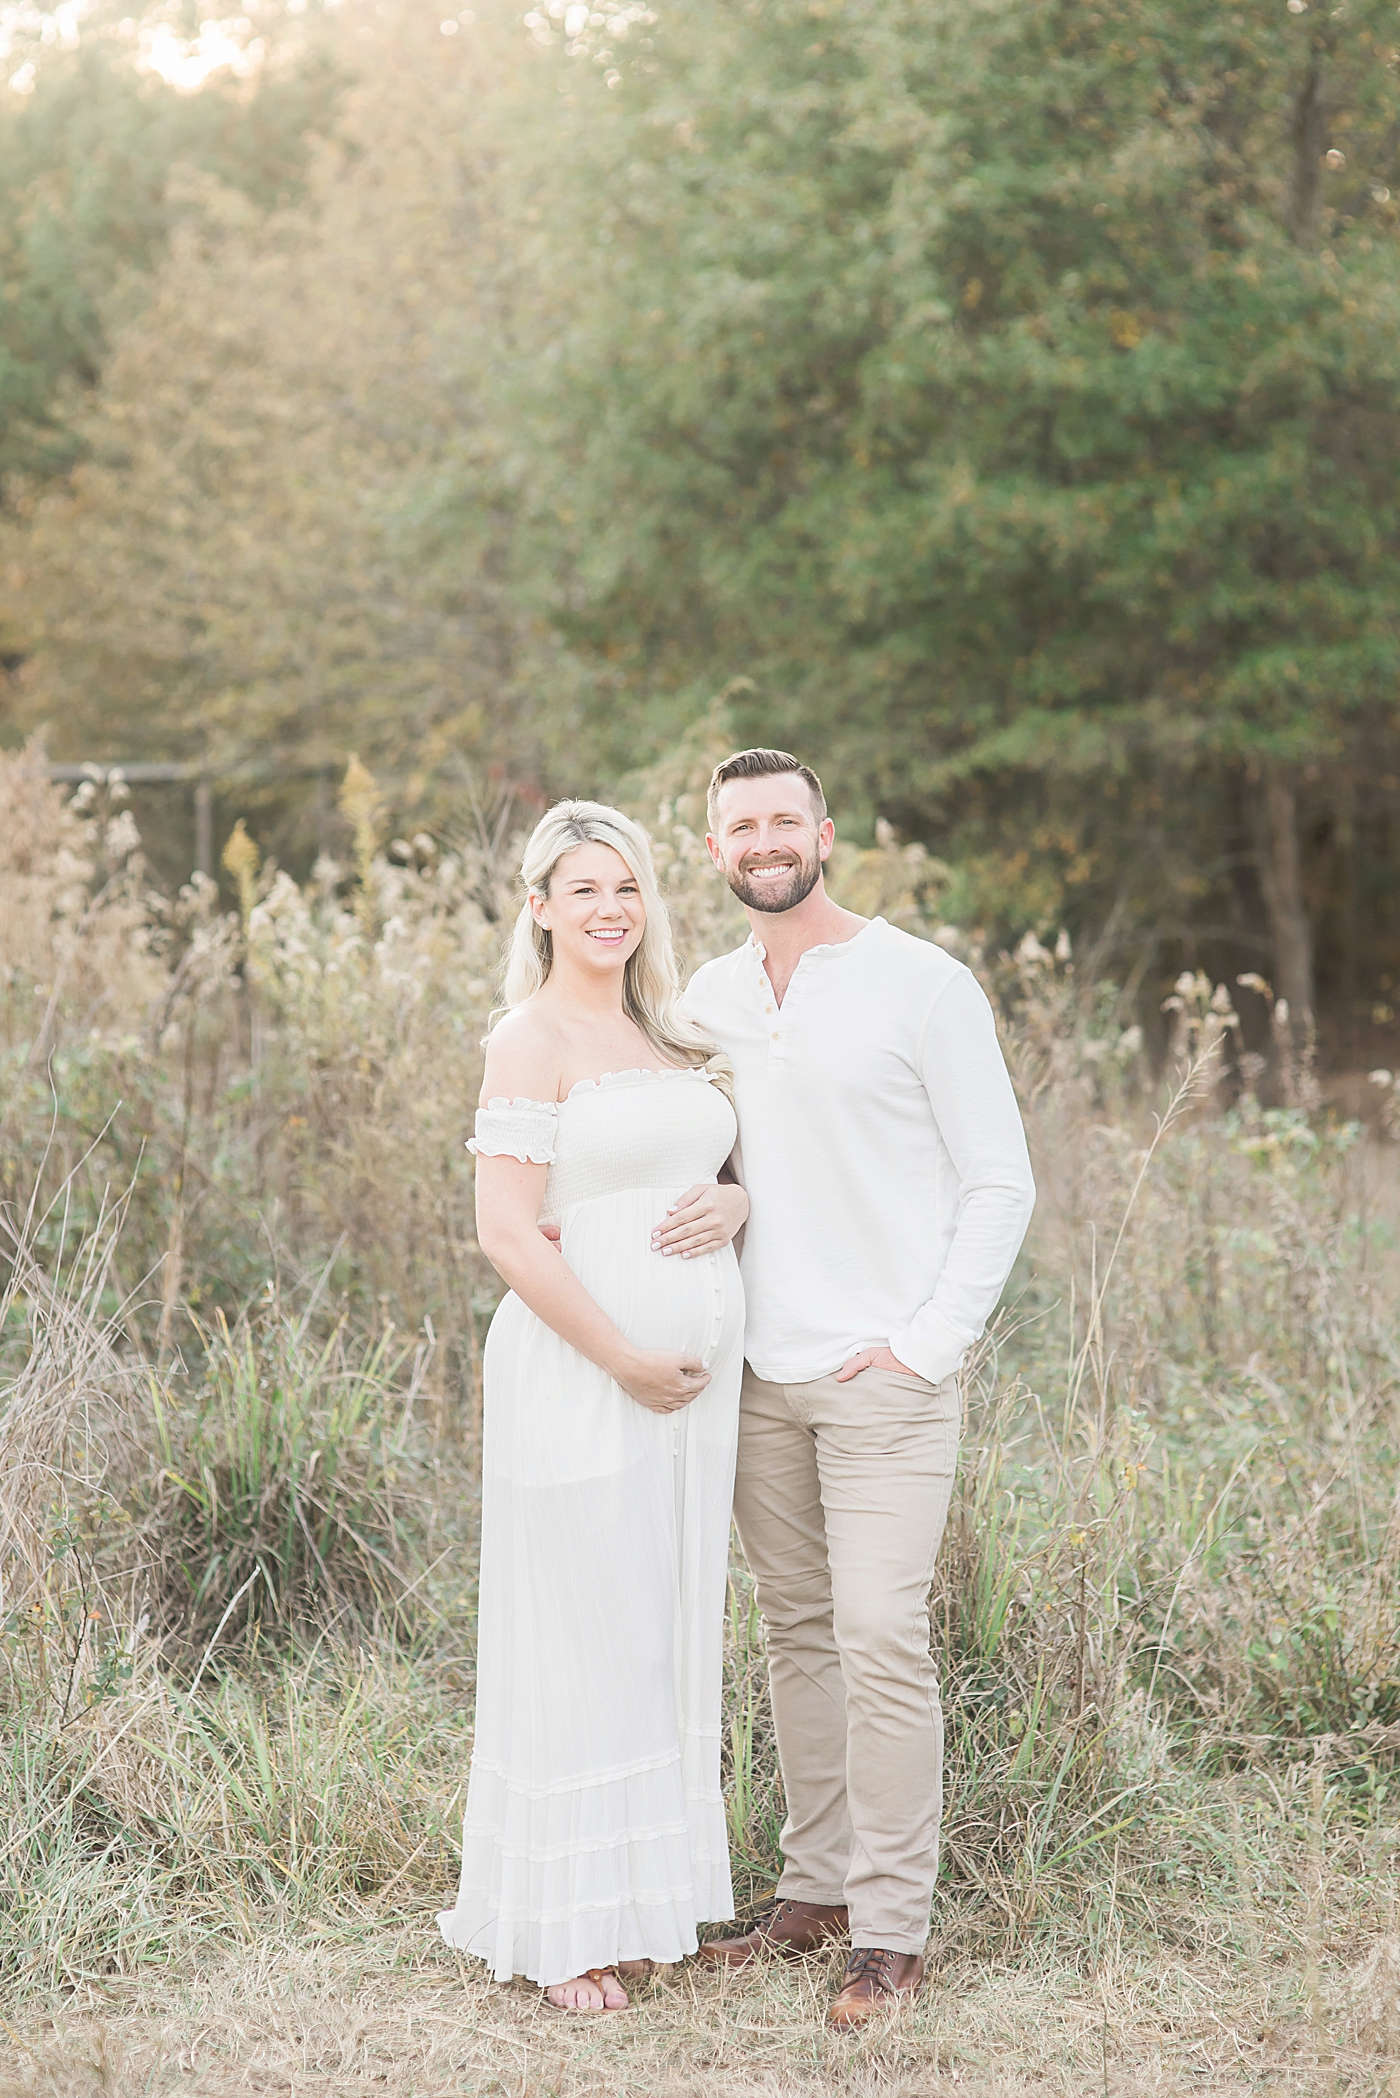 Mom and dad to be smiling together | Photo by Charlotte Maternity Photographer Anna Wisjo 